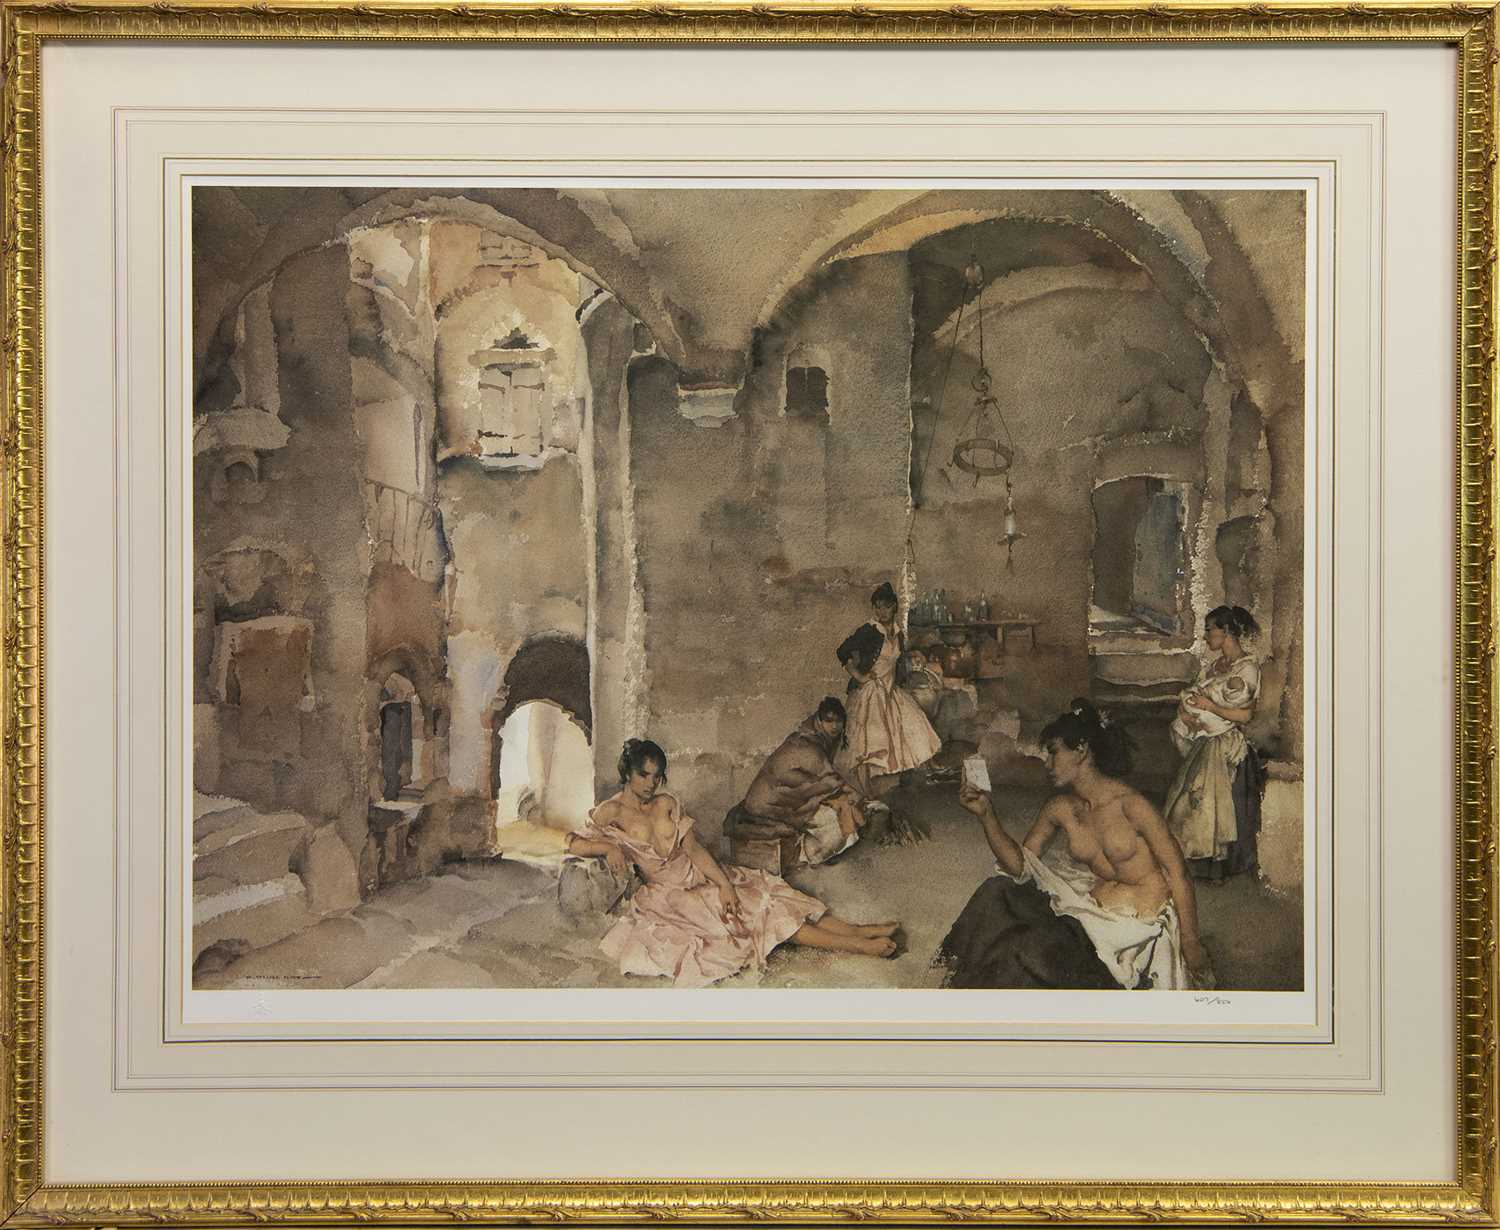 Lot 520 - HARD AT WORK, A PRINT BY SIR WILLIAM RUSSELL FLINT